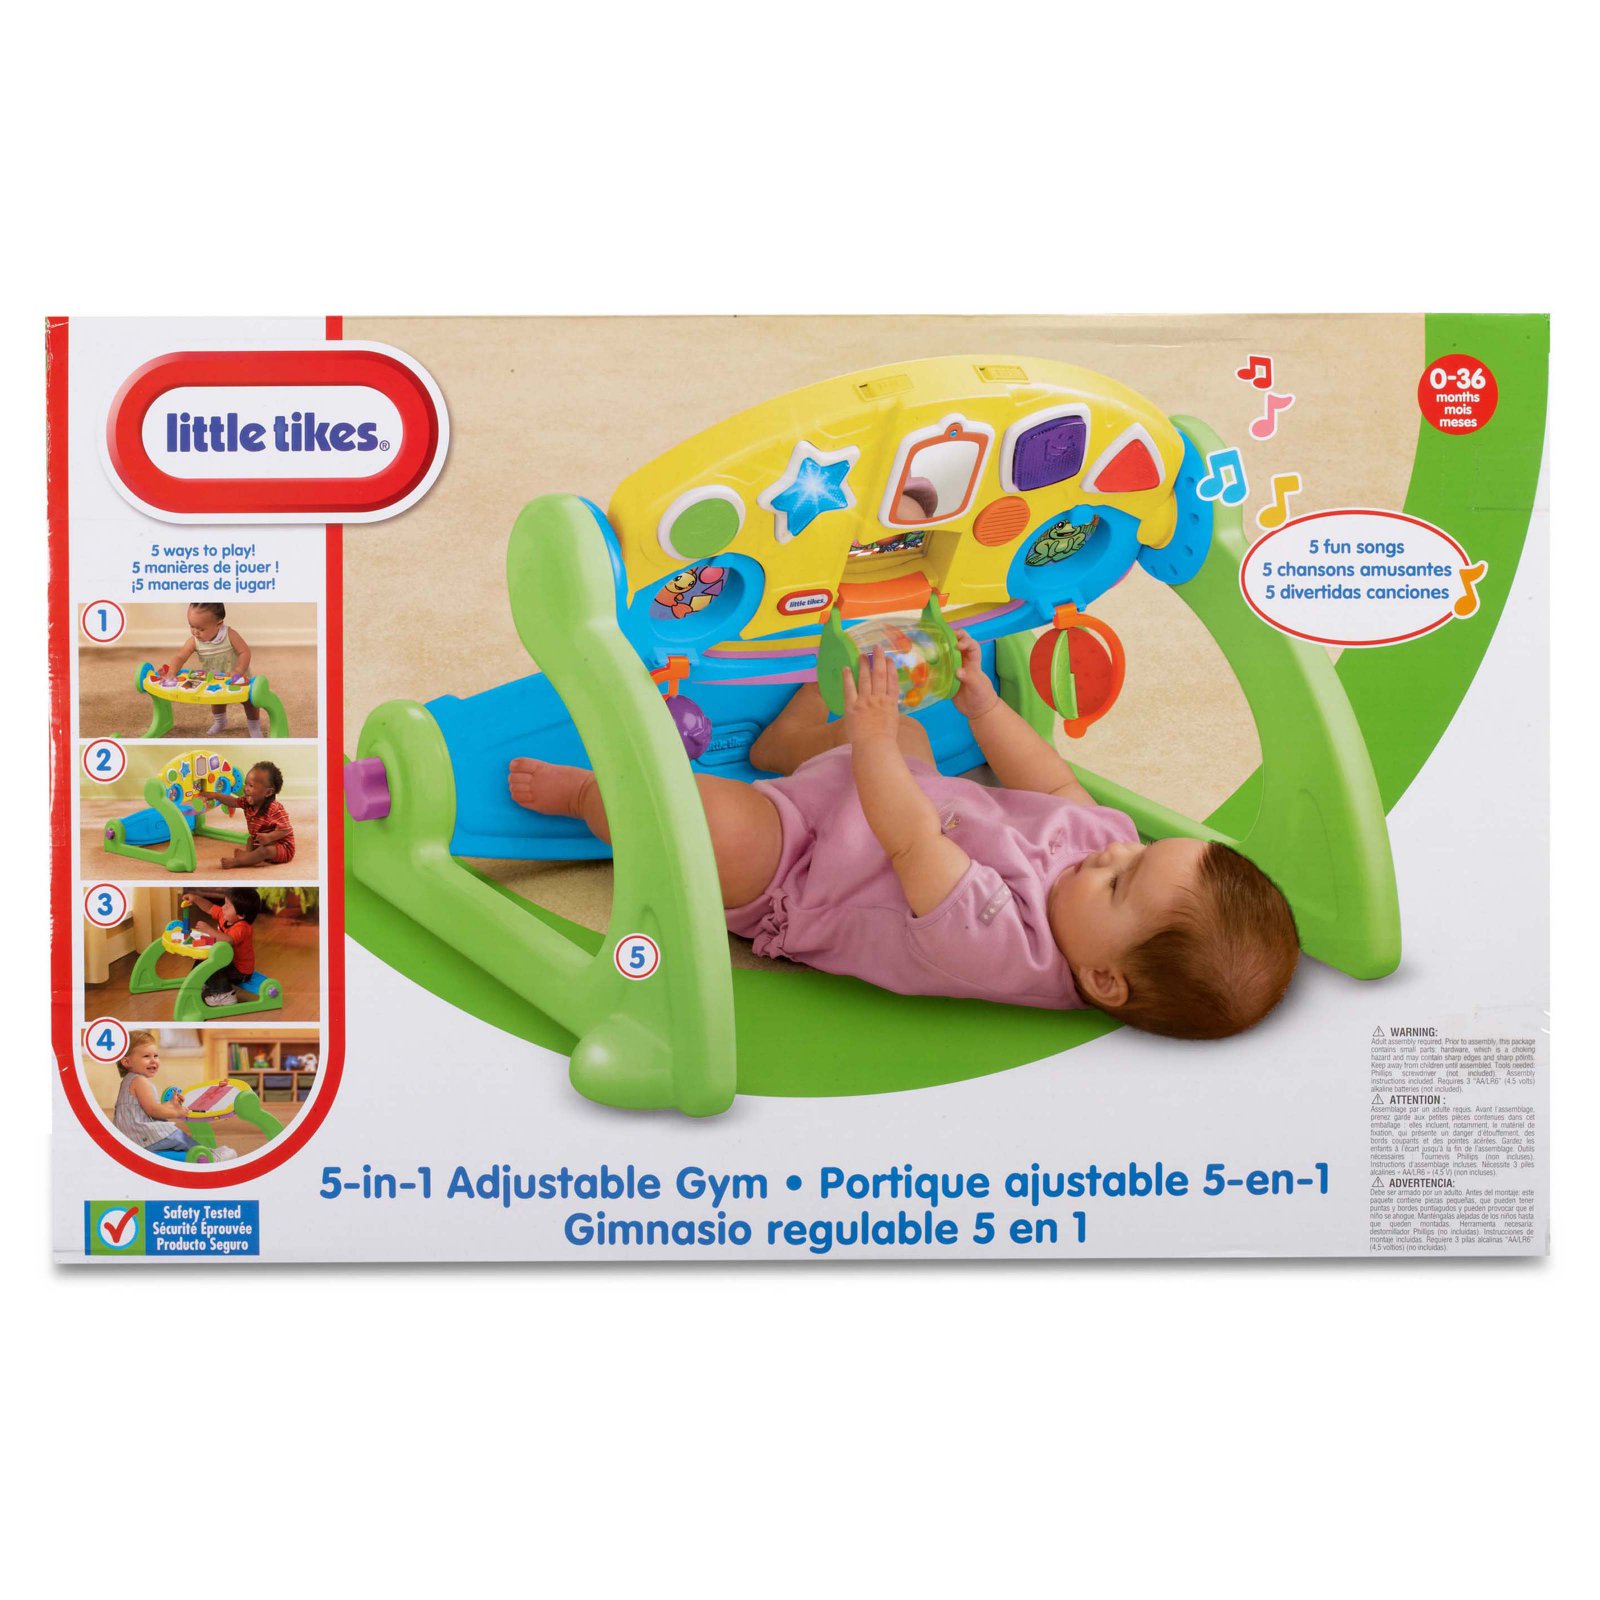 Little Tikes 5-In-1 Adjustable Gym - image 5 of 5